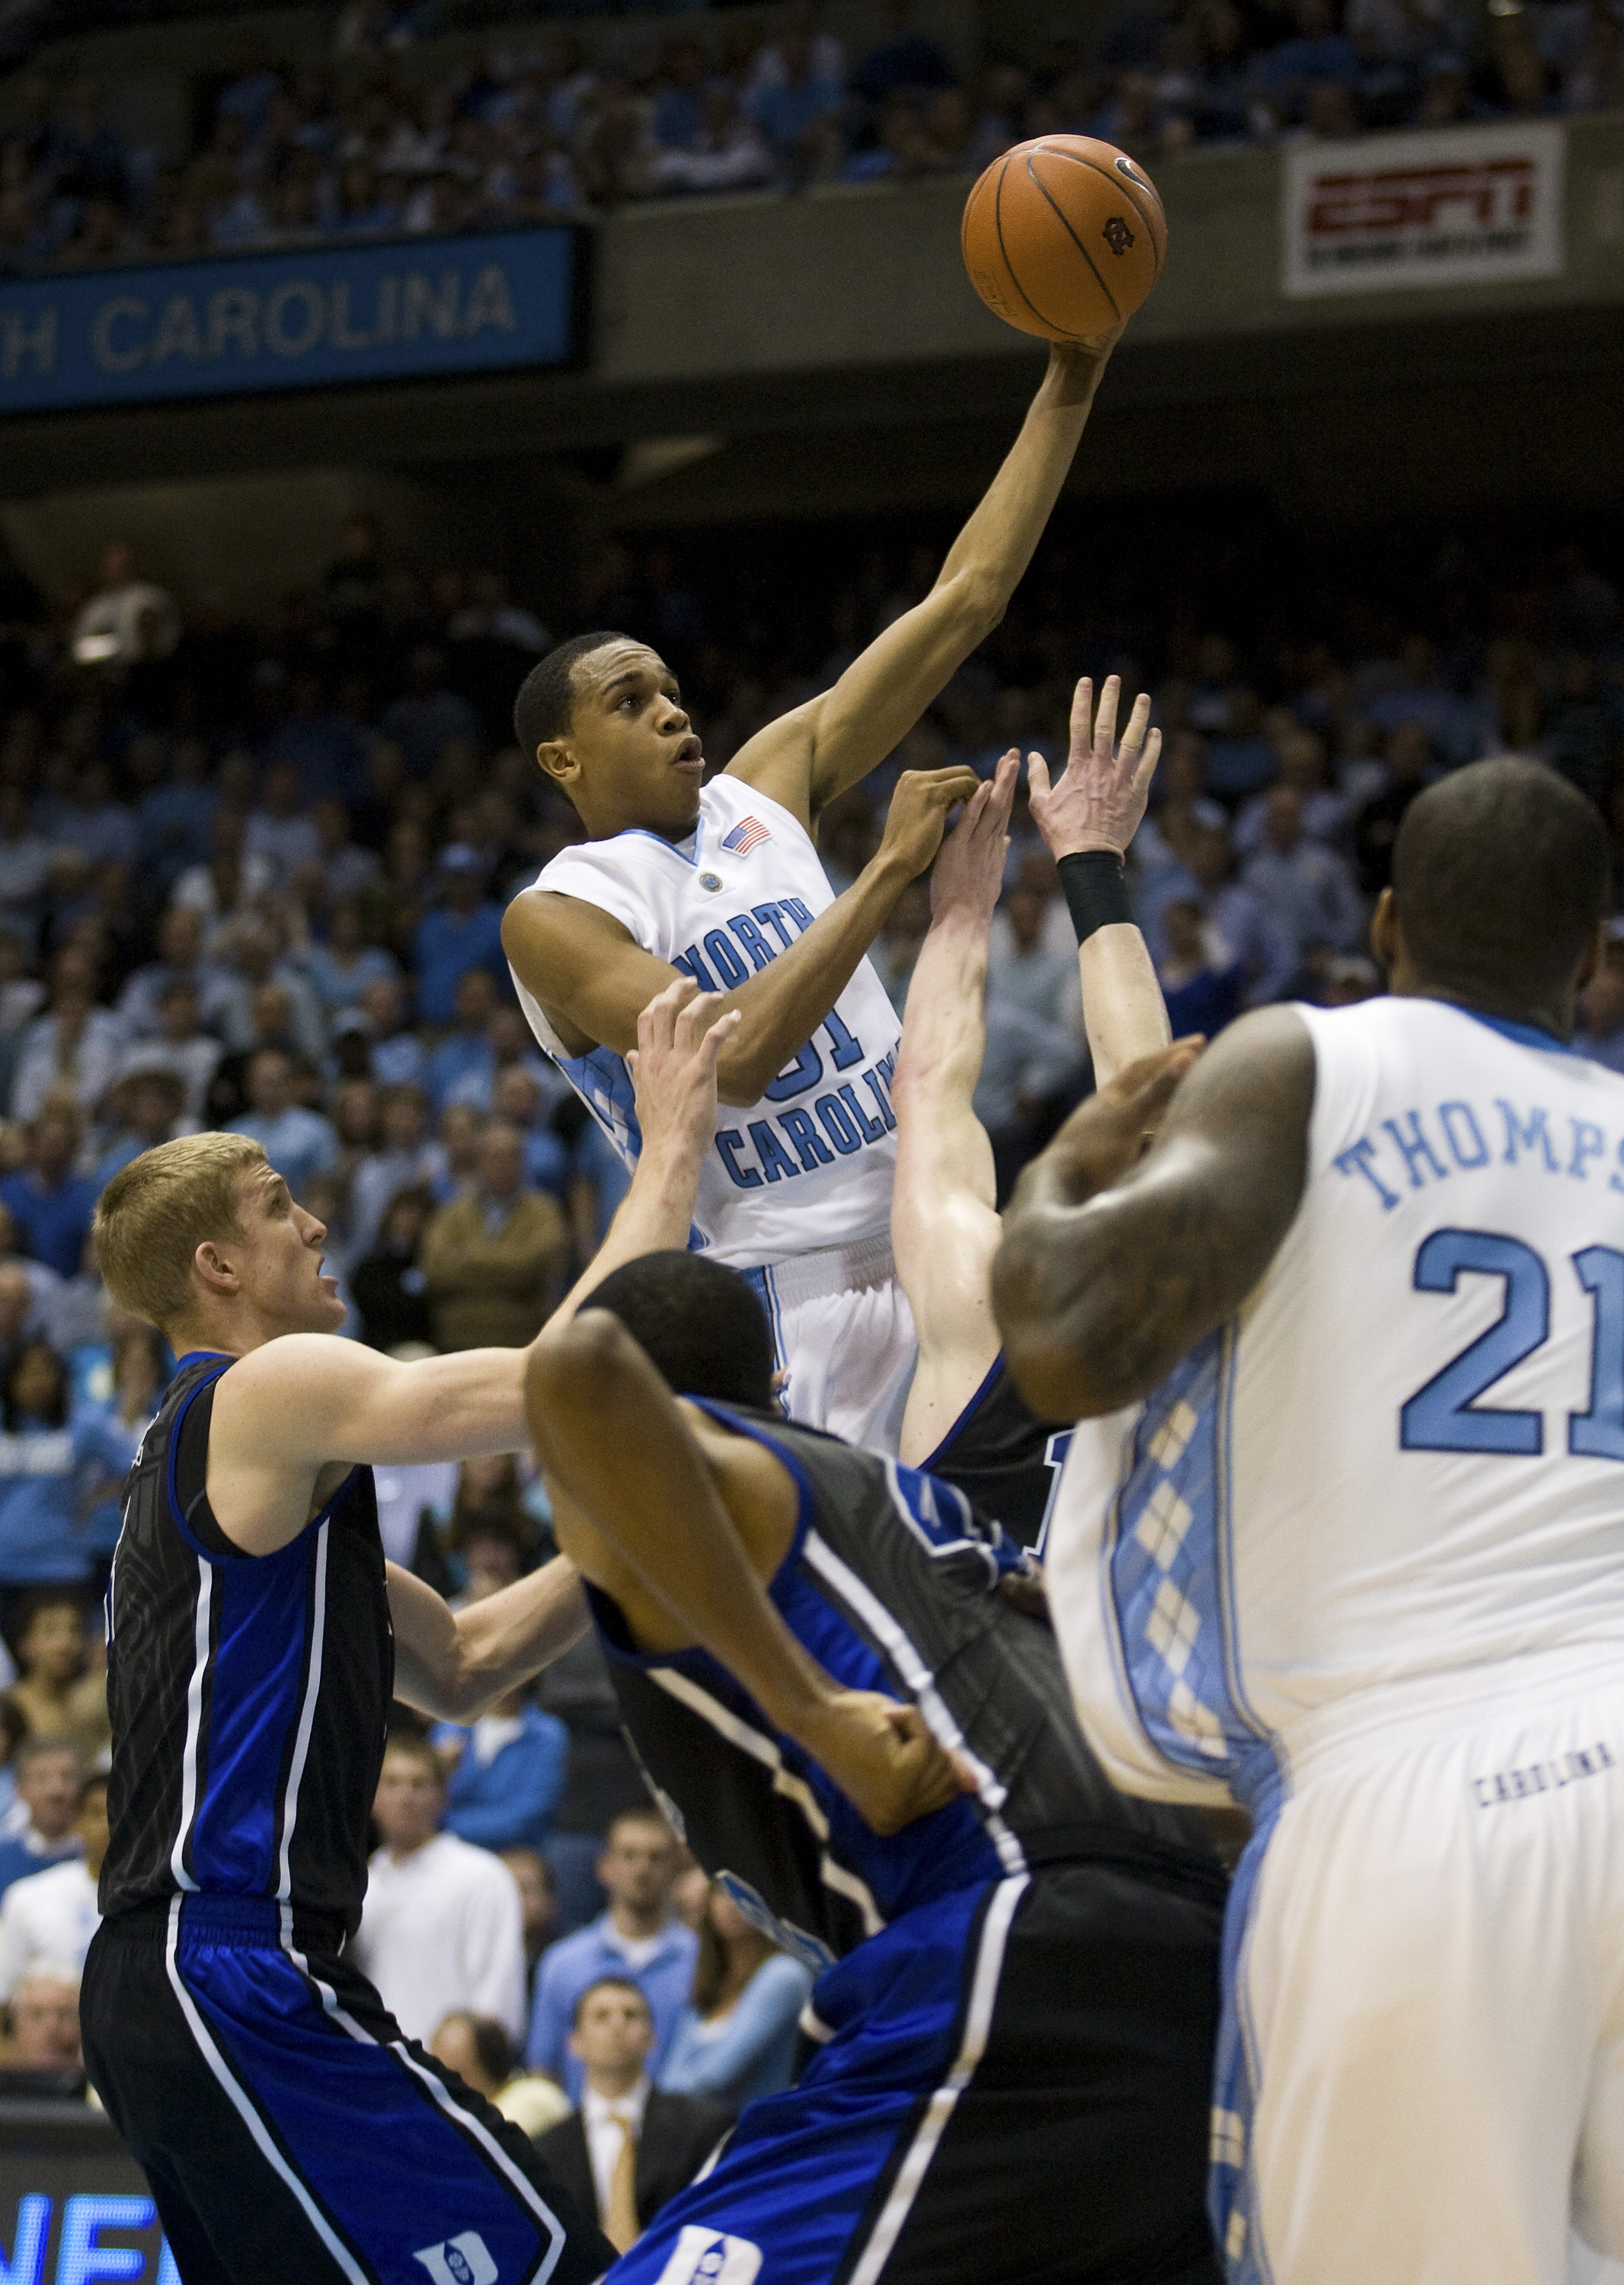 CHAPEL HILL, NC - FEBRUARY 10: North Carolina forward John Henson #31 puts up a shot against Duke during a men's college basketball game at Dean Smith Center on February 10, 2010 in Chapel Hill, North Carolina. (Photo by Chris Keane/Getty Images)